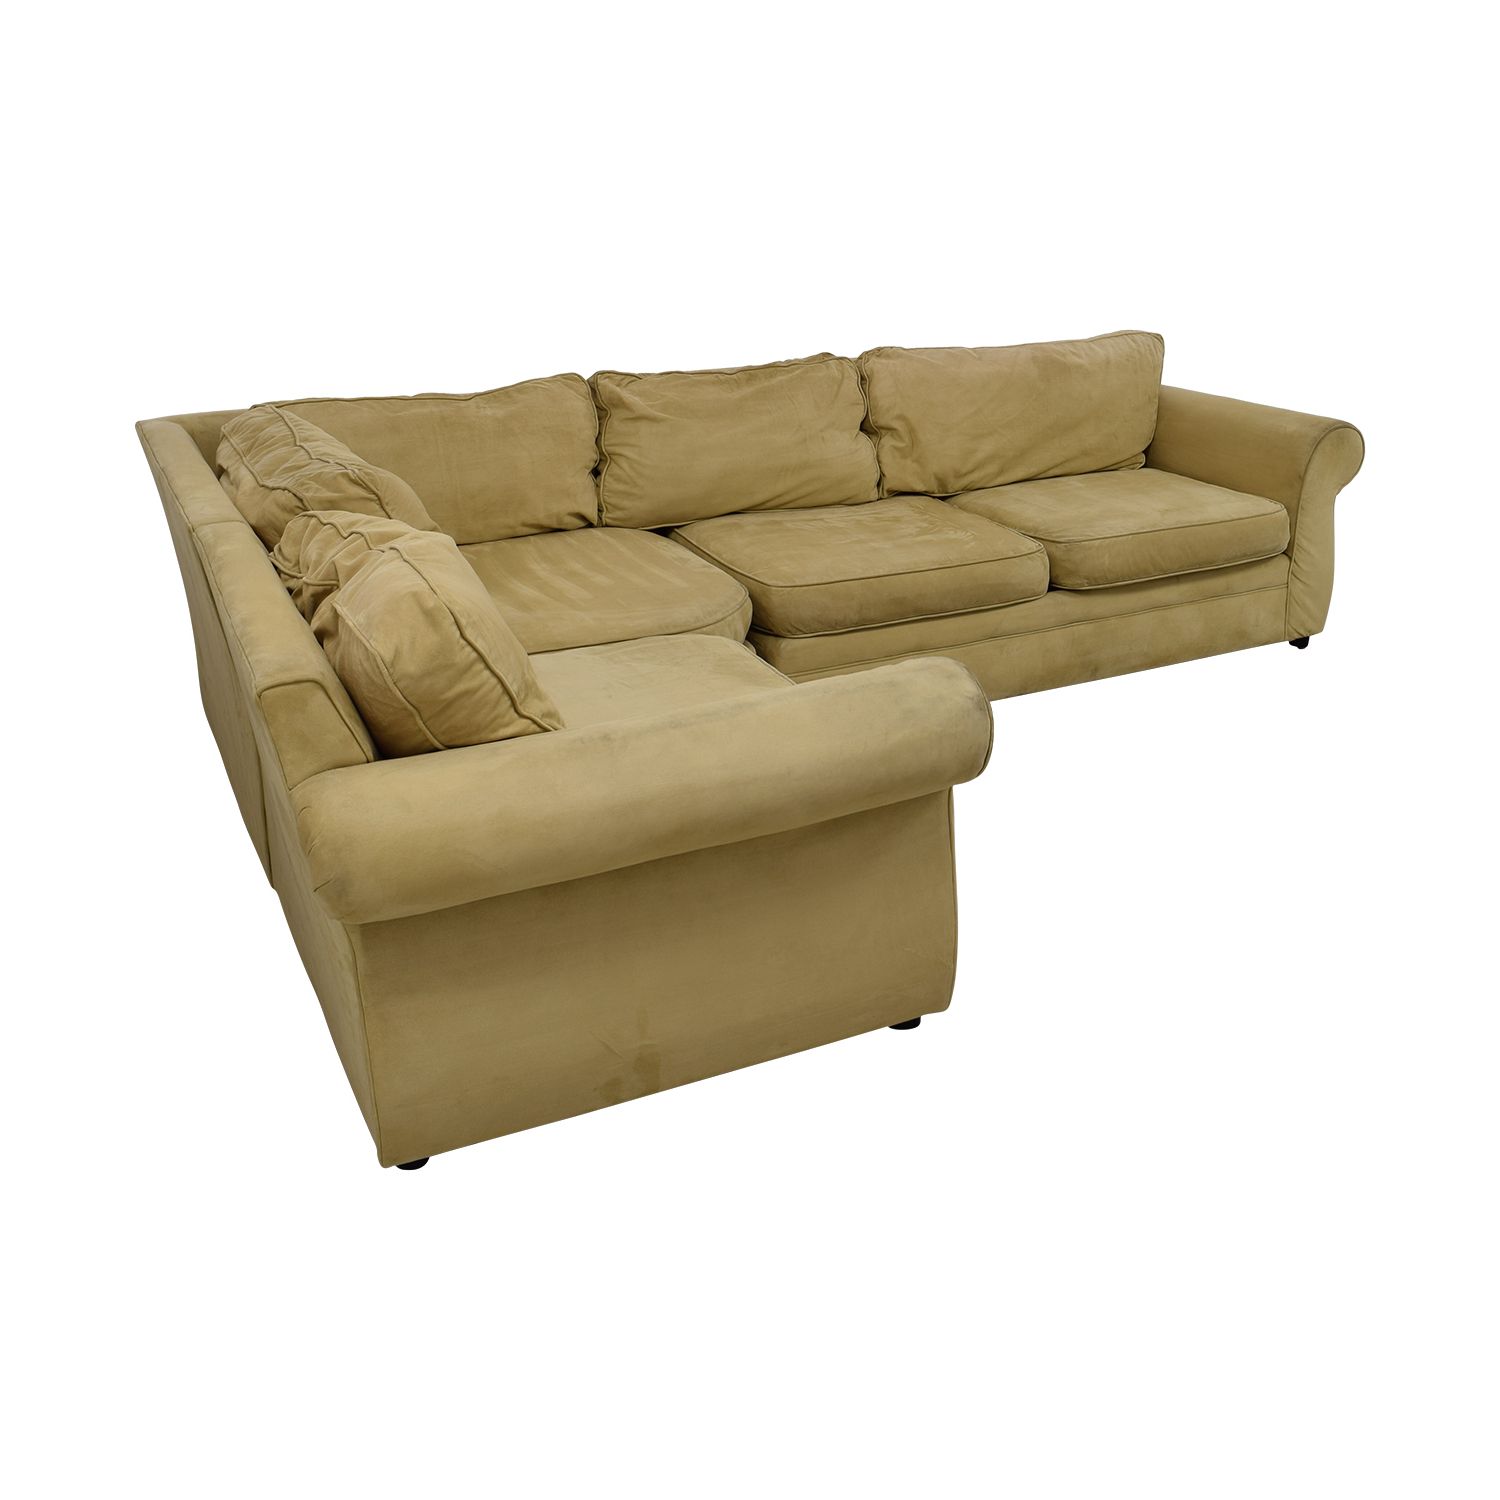 [%90% Off – Pottery Barn Pottery Barn Beige L Shaped Sectional / Sofas Throughout 2018 Beige L Shaped Sectional Sofas|beige L Shaped Sectional Sofas Inside Latest 90% Off – Pottery Barn Pottery Barn Beige L Shaped Sectional / Sofas|well Known Beige L Shaped Sectional Sofas For 90% Off – Pottery Barn Pottery Barn Beige L Shaped Sectional / Sofas|best And Newest 90% Off – Pottery Barn Pottery Barn Beige L Shaped Sectional / Sofas Regarding Beige L Shaped Sectional Sofas%] (Photo 12 of 15)